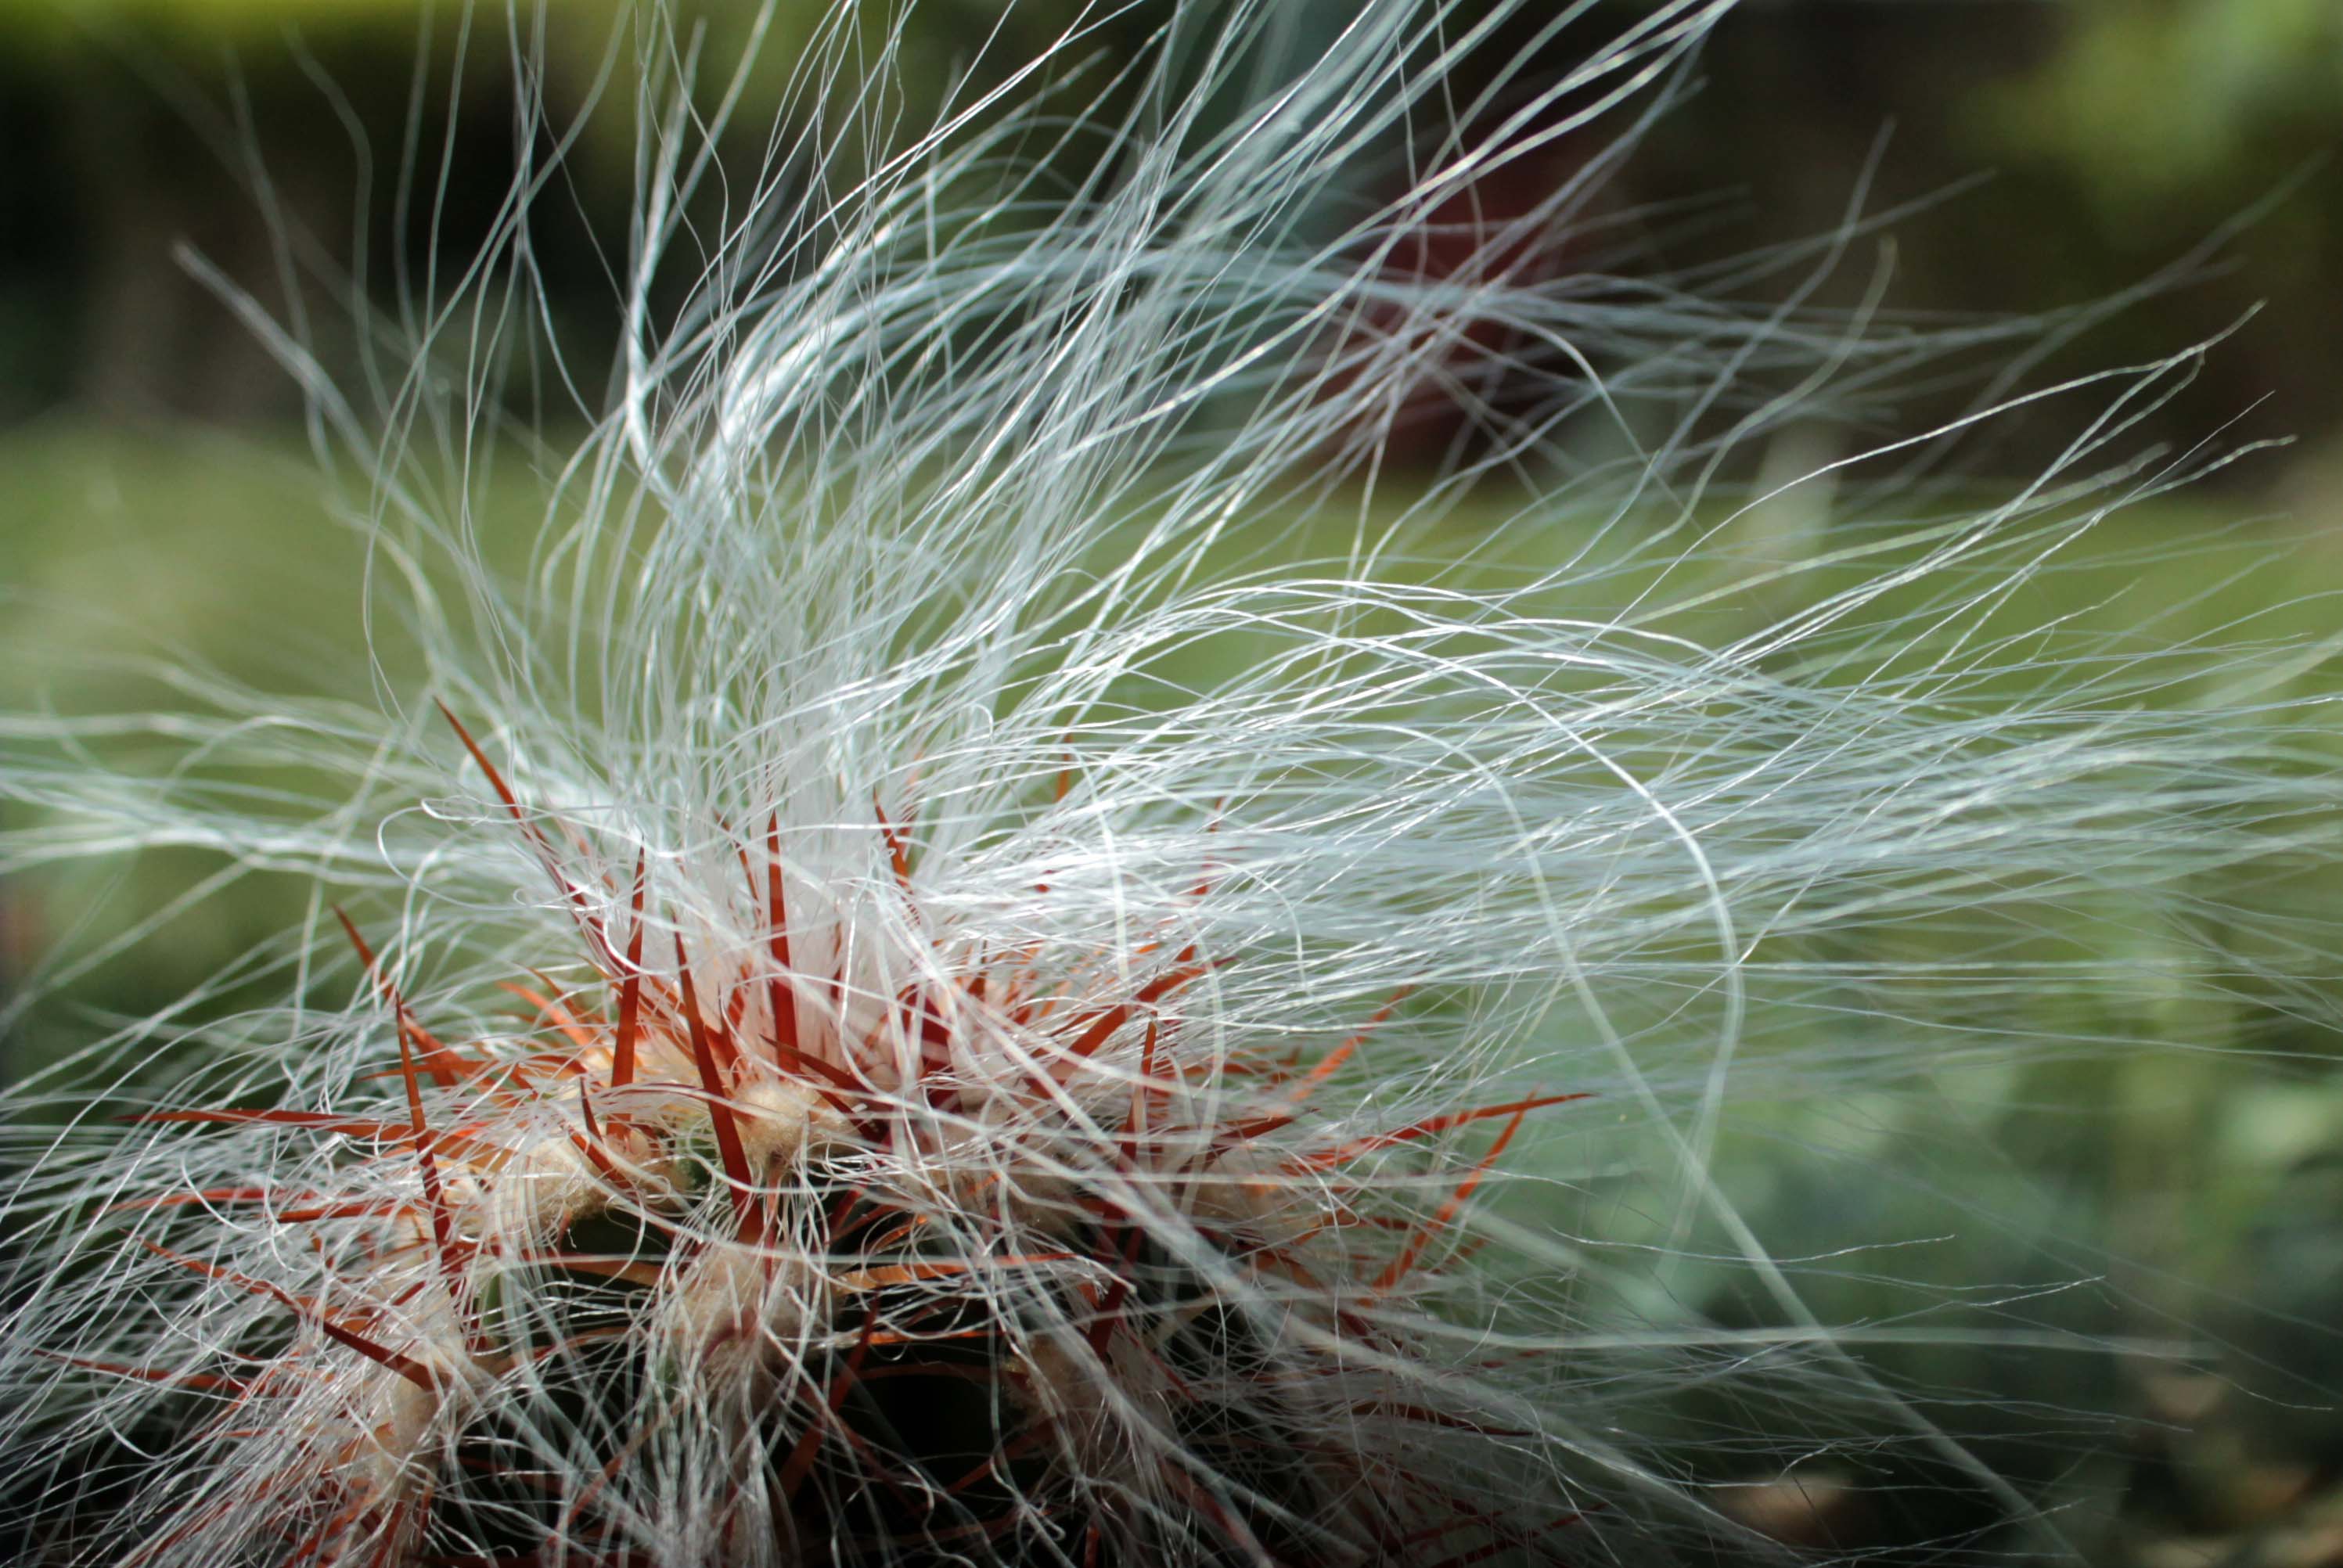 hairy cactus – An Enchanted Place